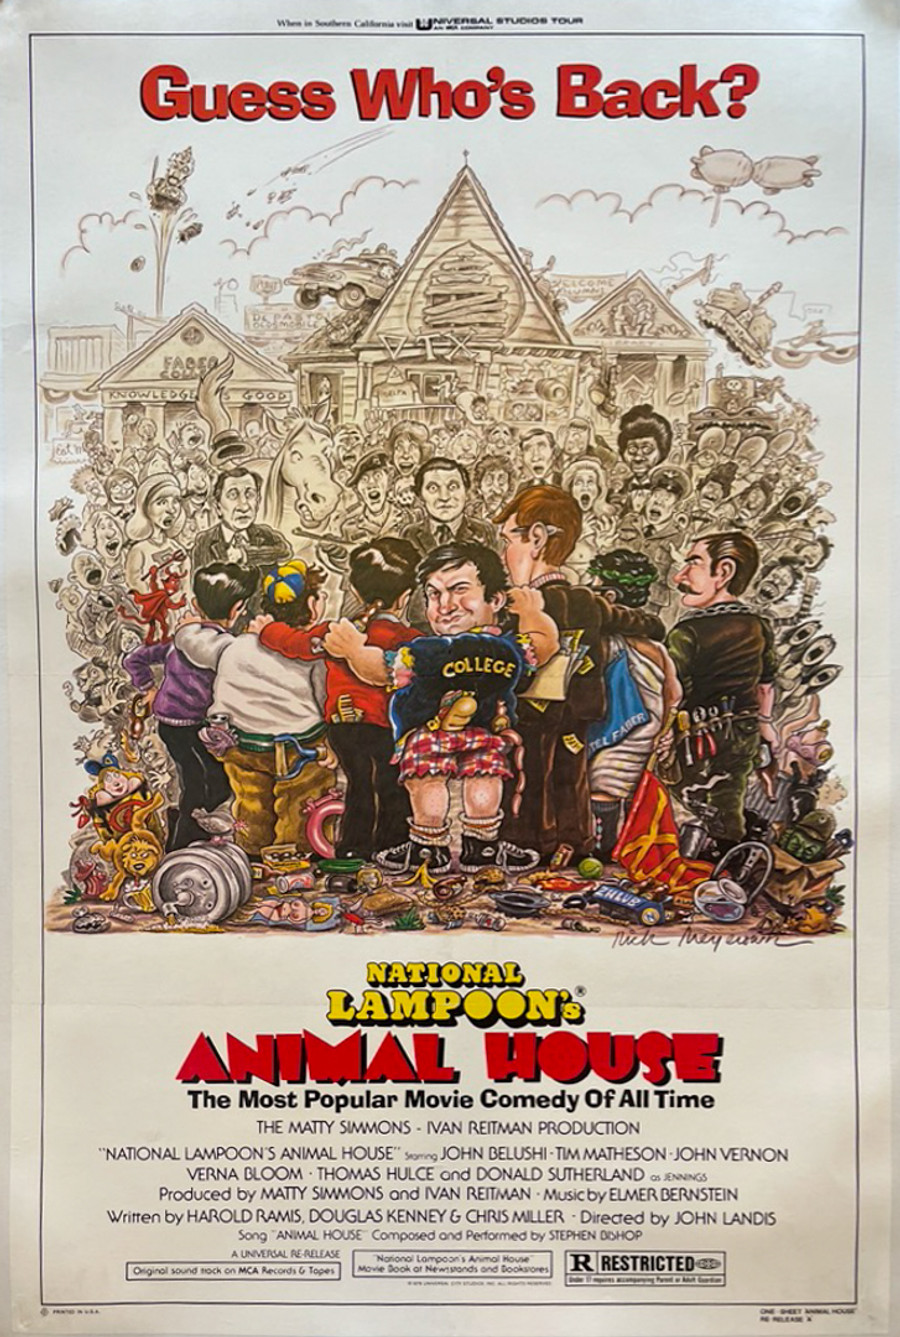 Animal House one Sheet Re-release style A movie poster by Rick Meyerowitz printed circa 1979. B+ condition. Prior folds, pinholes in corners repaired. Recently mounted on archival linen.